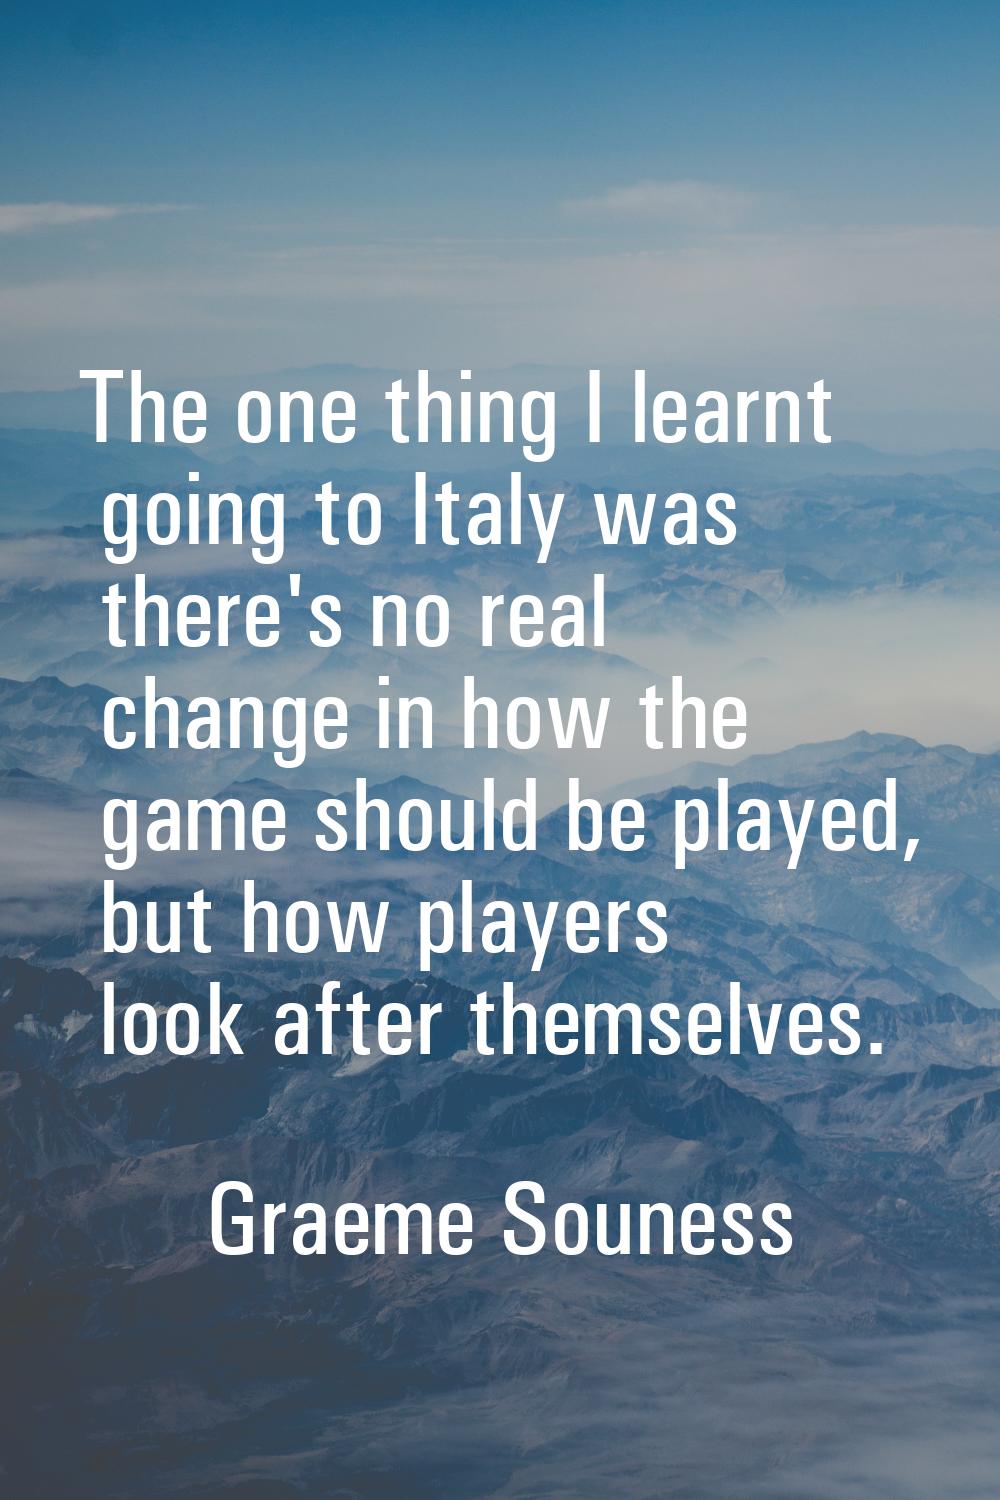 The one thing I learnt going to Italy was there's no real change in how the game should be played, 